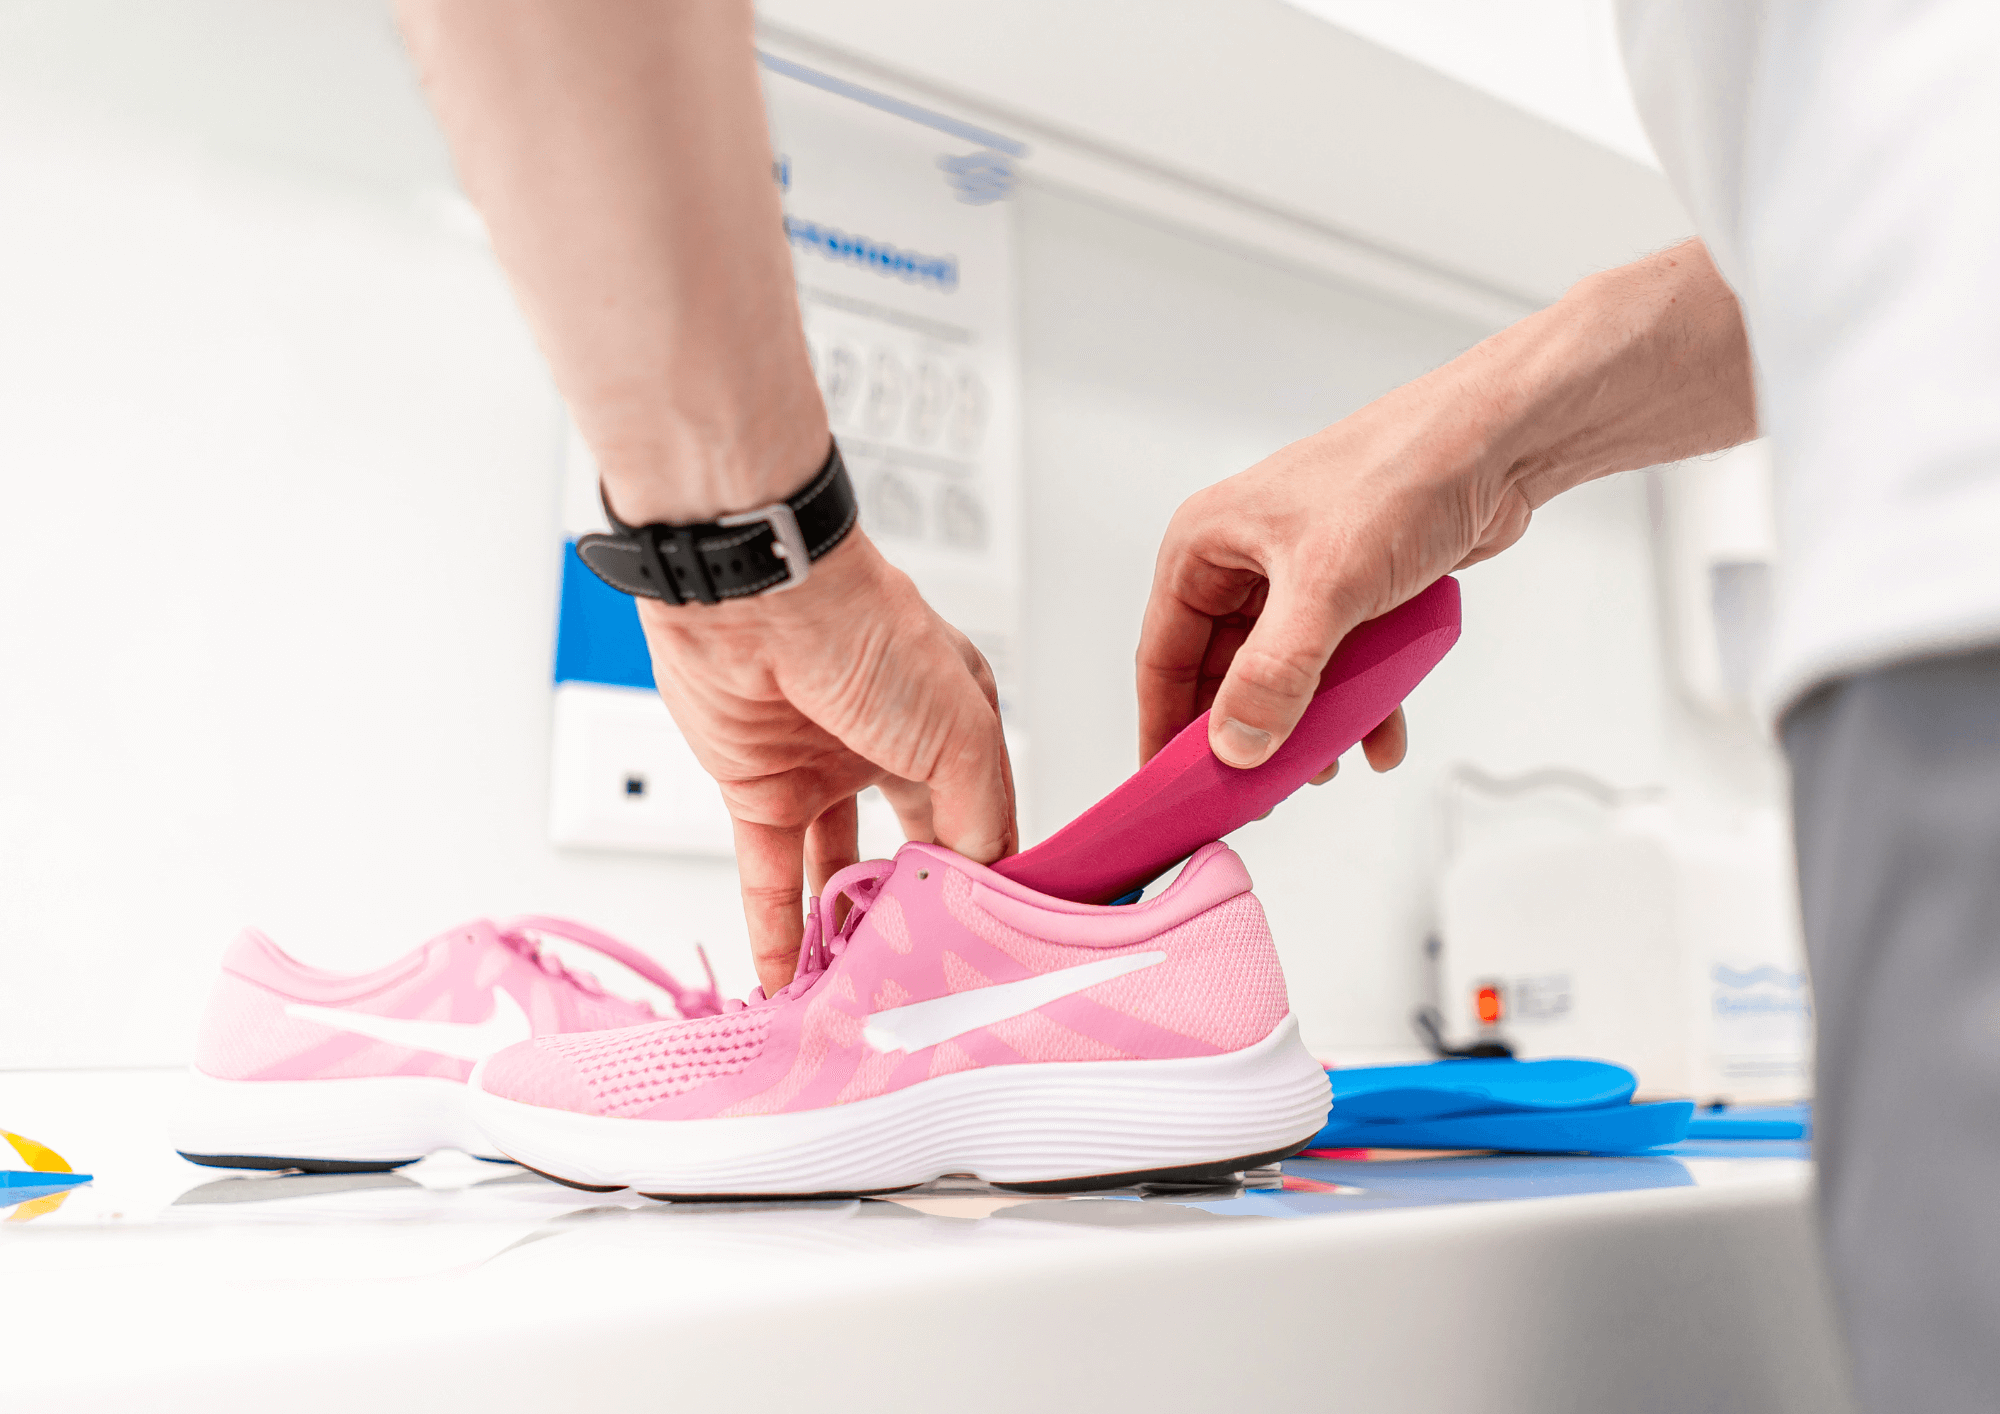 A person is inserting a pink orthotic into a pink sneaker.